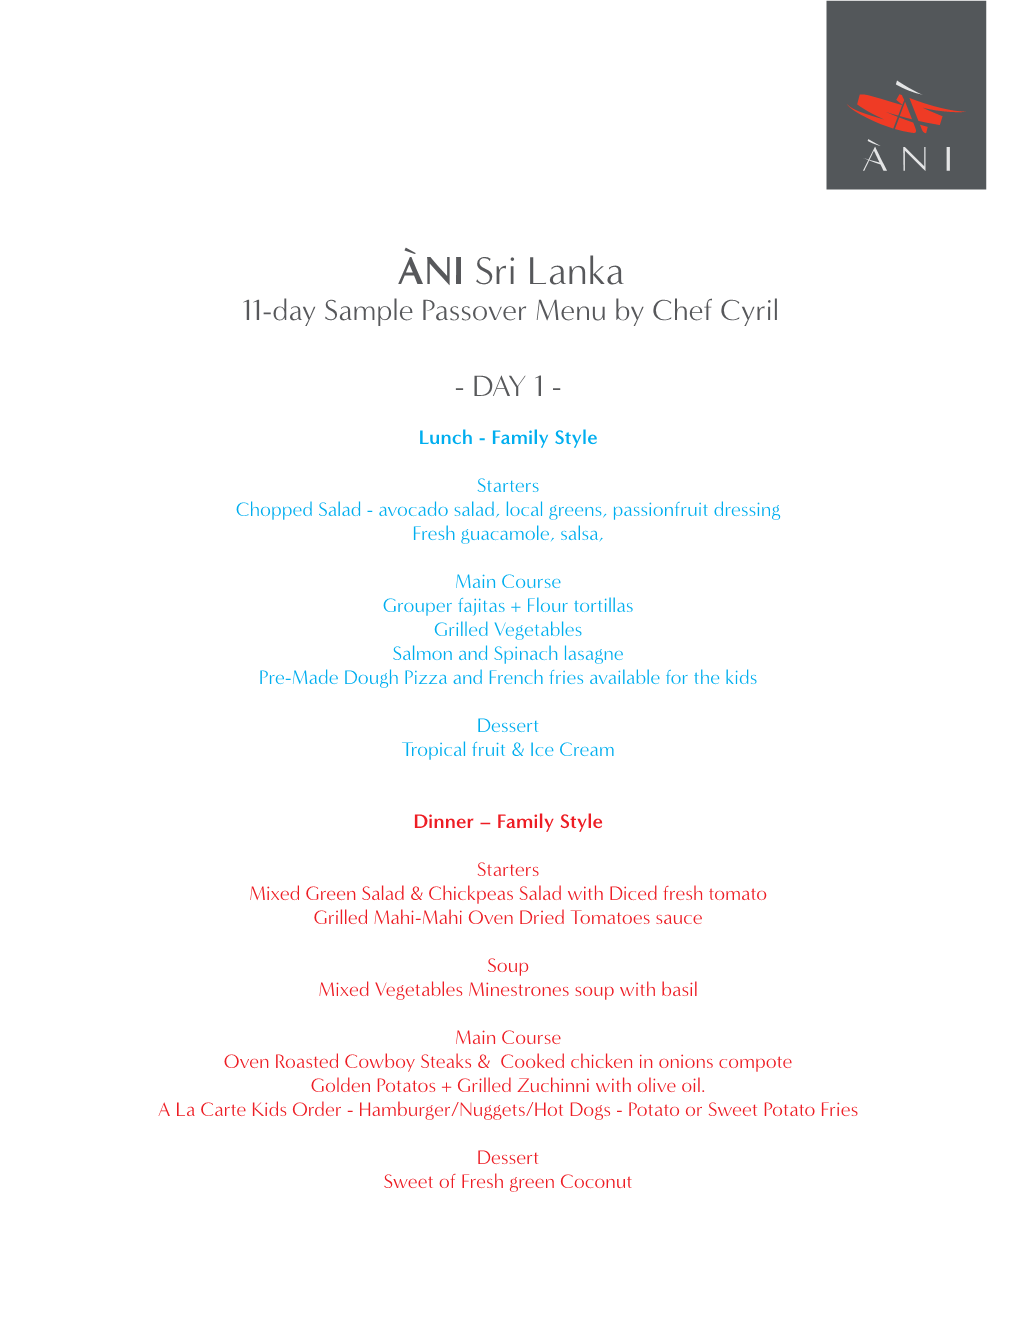 Passover Menu by Chef Cyril